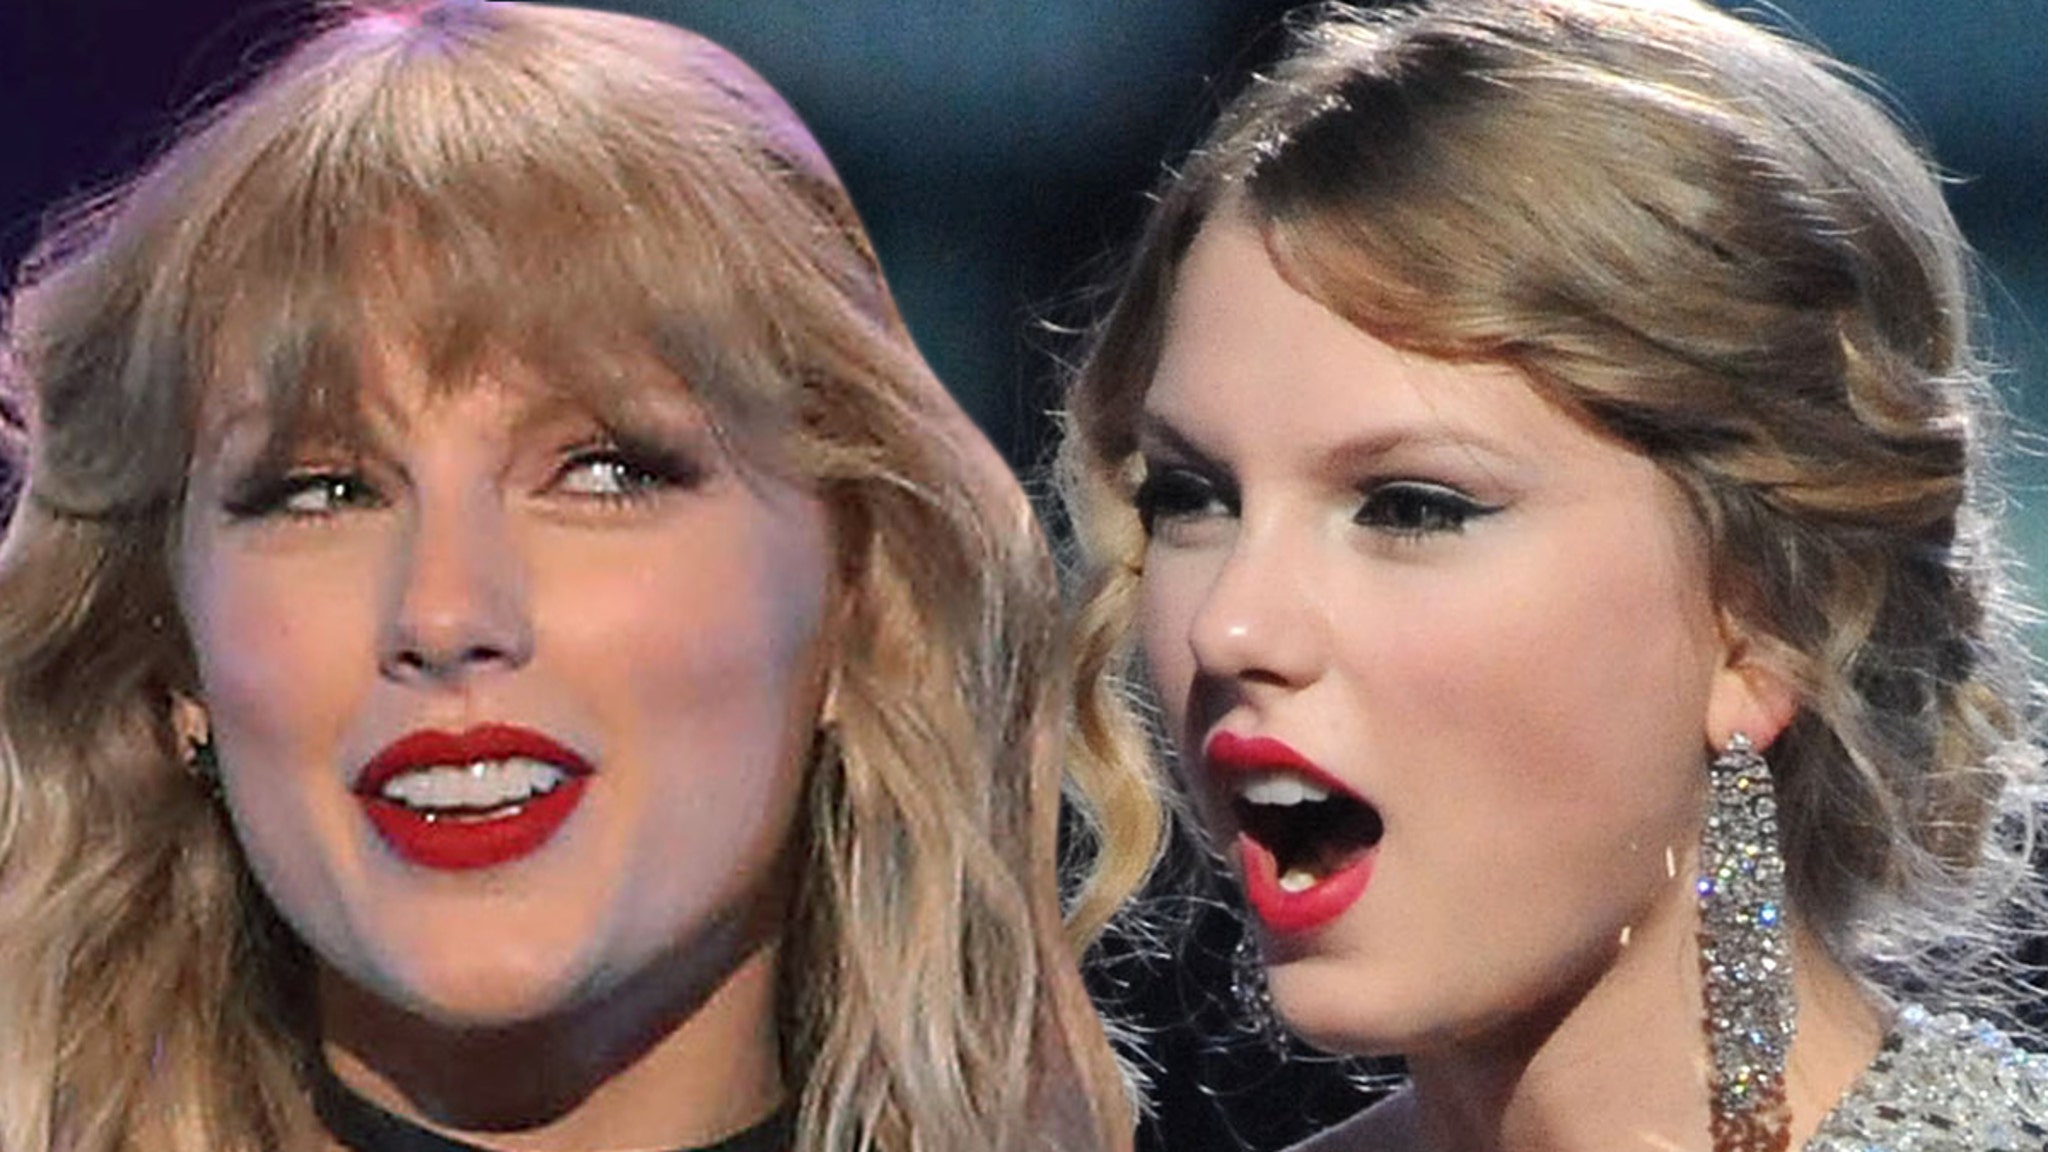 Taylor Swift’s ‘Love Story’ re-recording got off to a great start